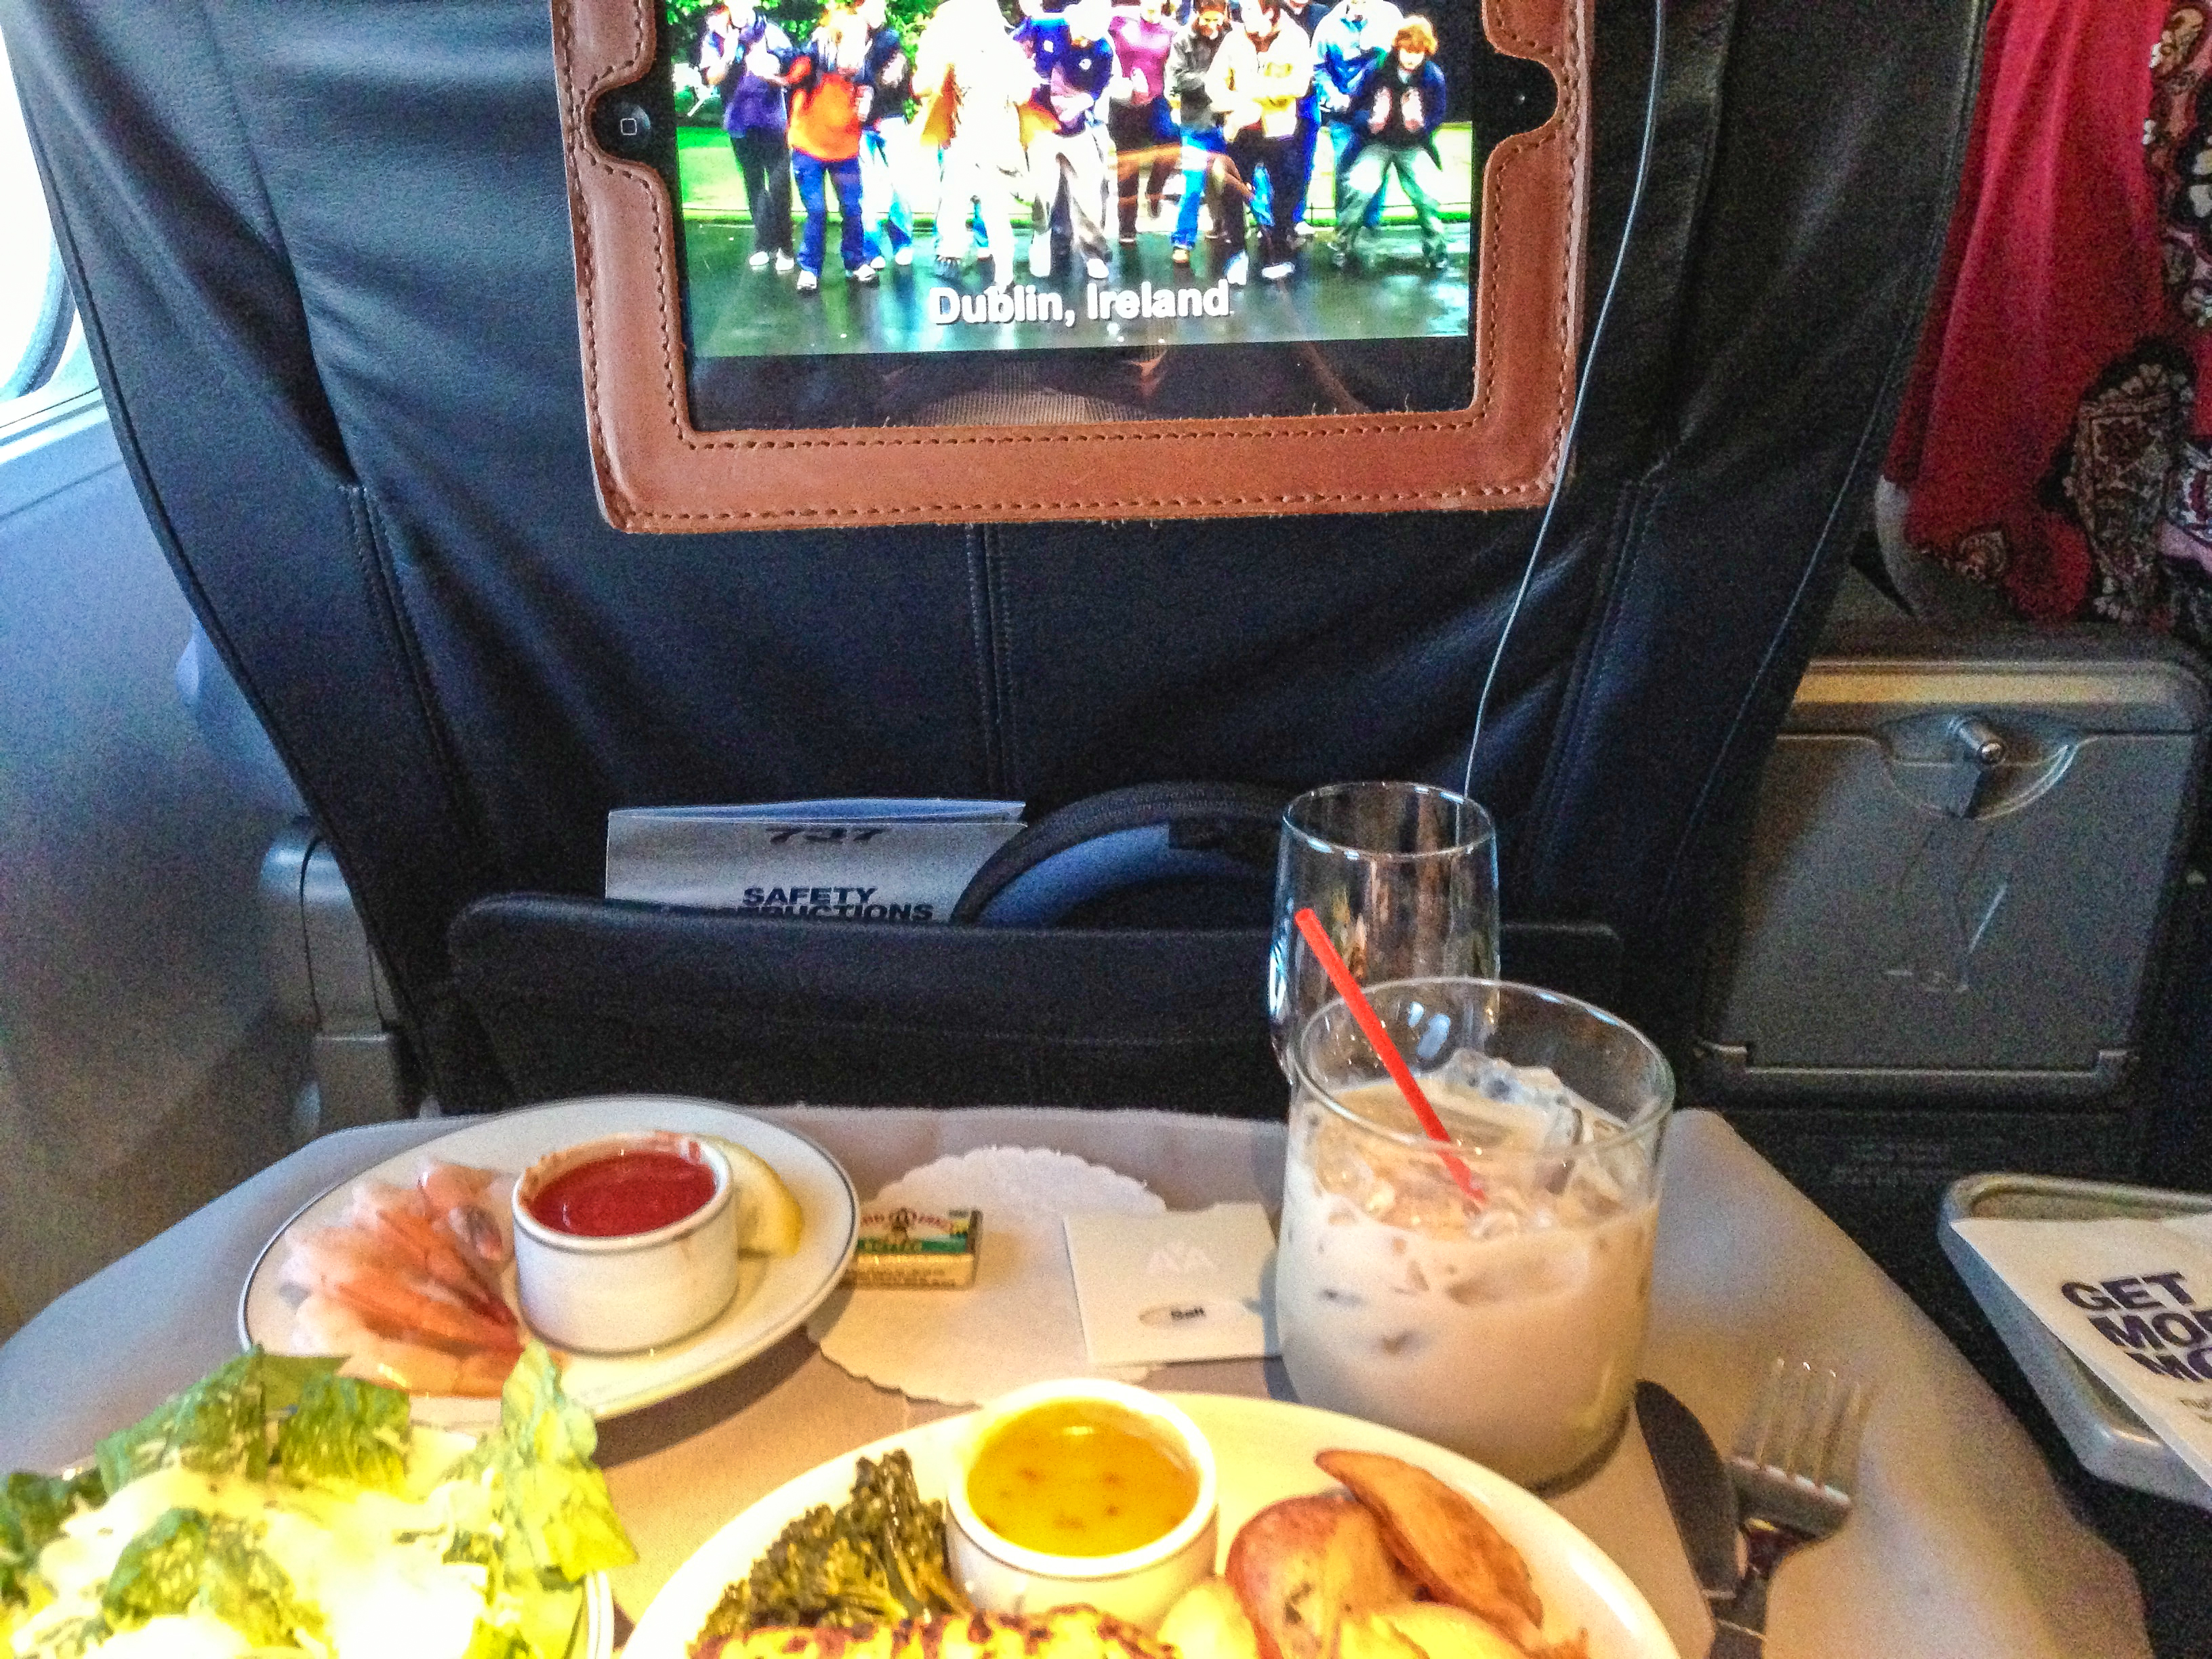 Dinner (with iPad in-flight entertainment)